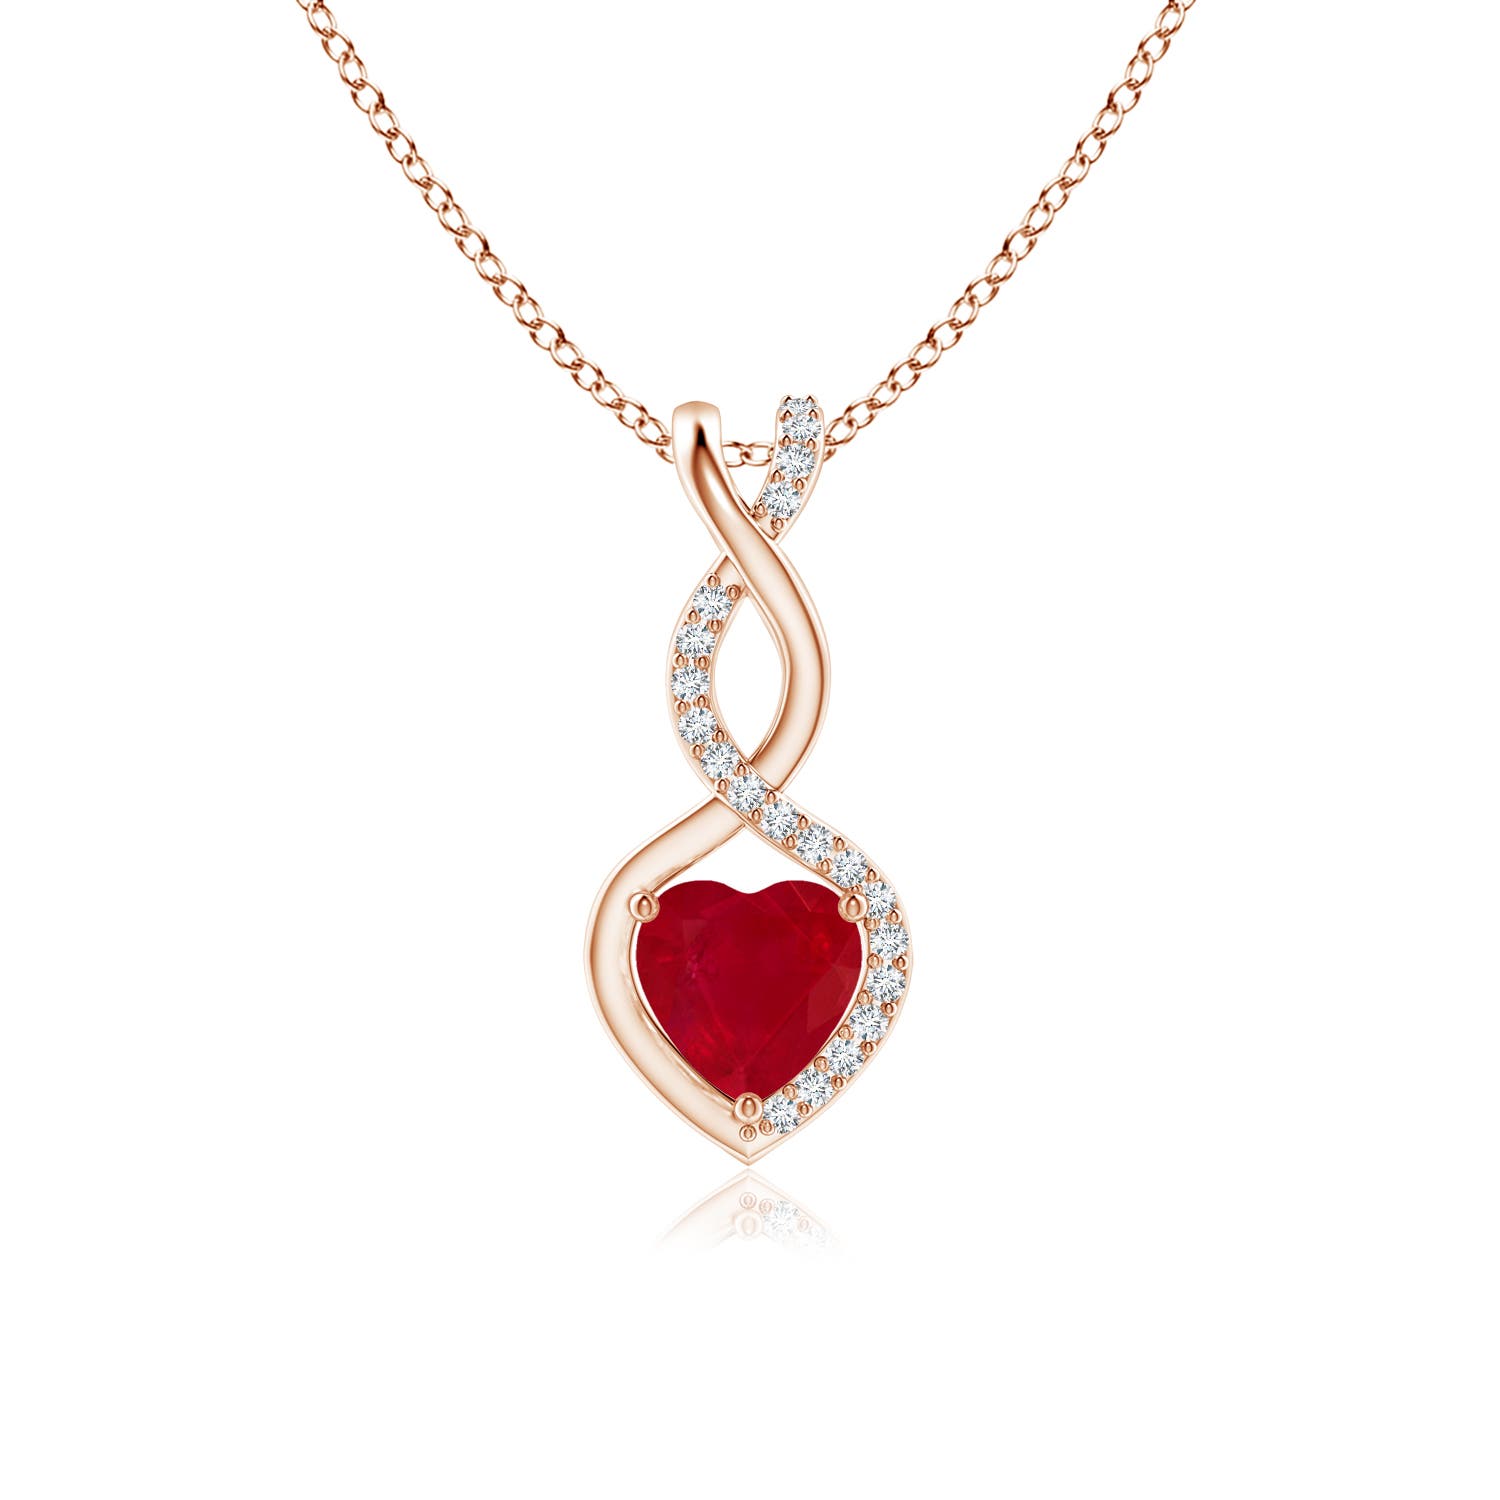 AA - Ruby / 0.61 CT / 14 KT Rose Gold